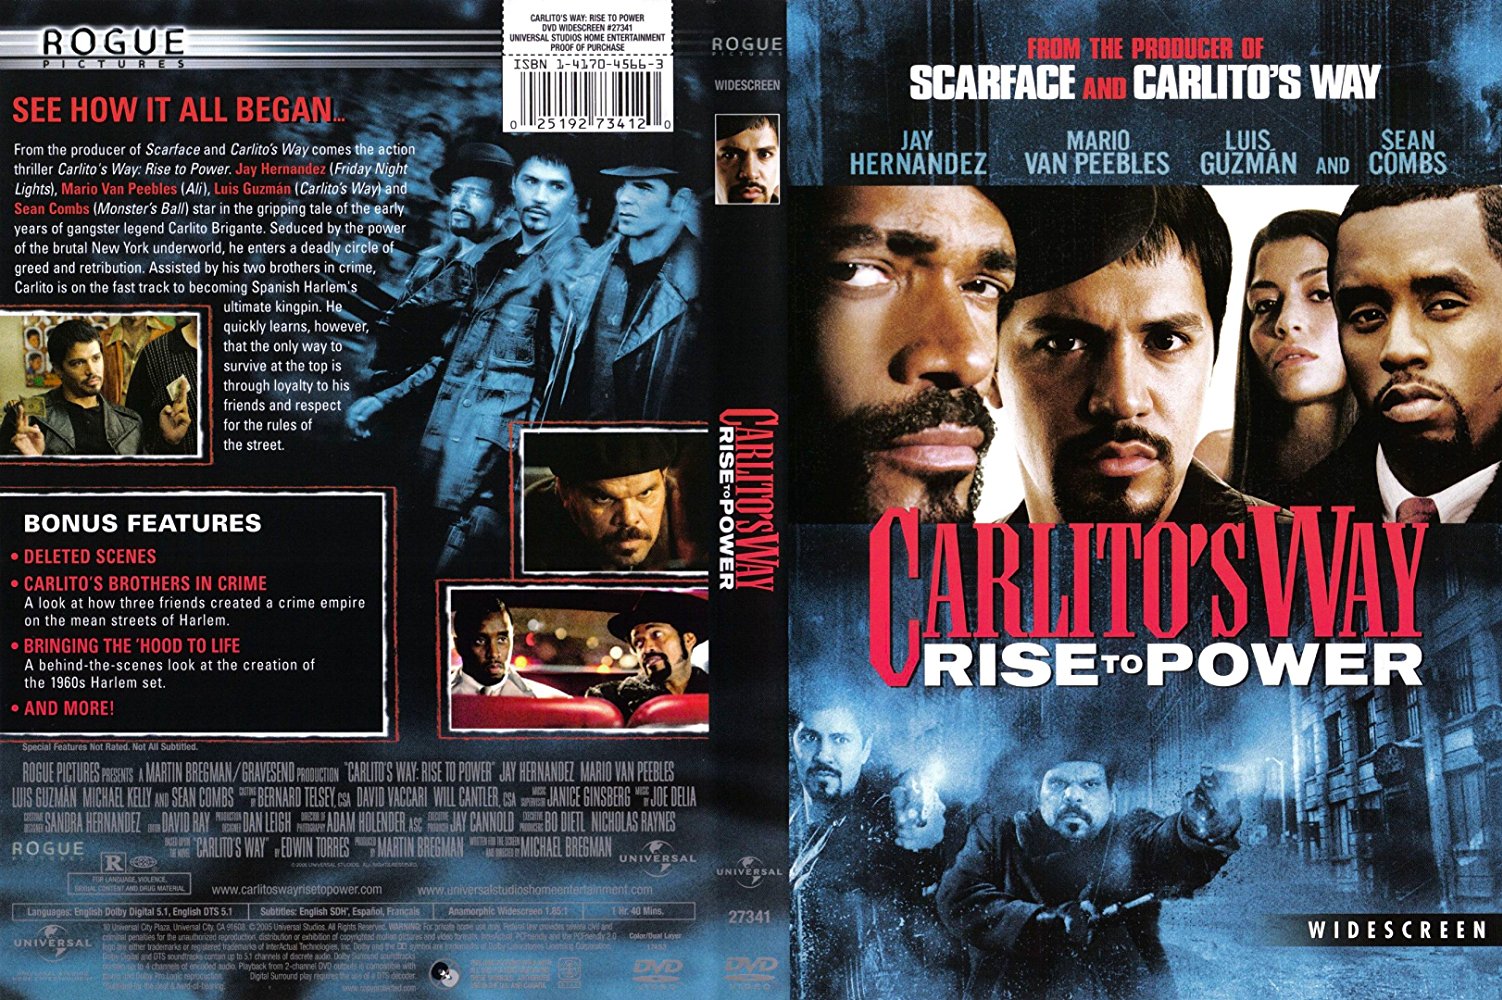 Watch Carlito's Way: Rise to Power